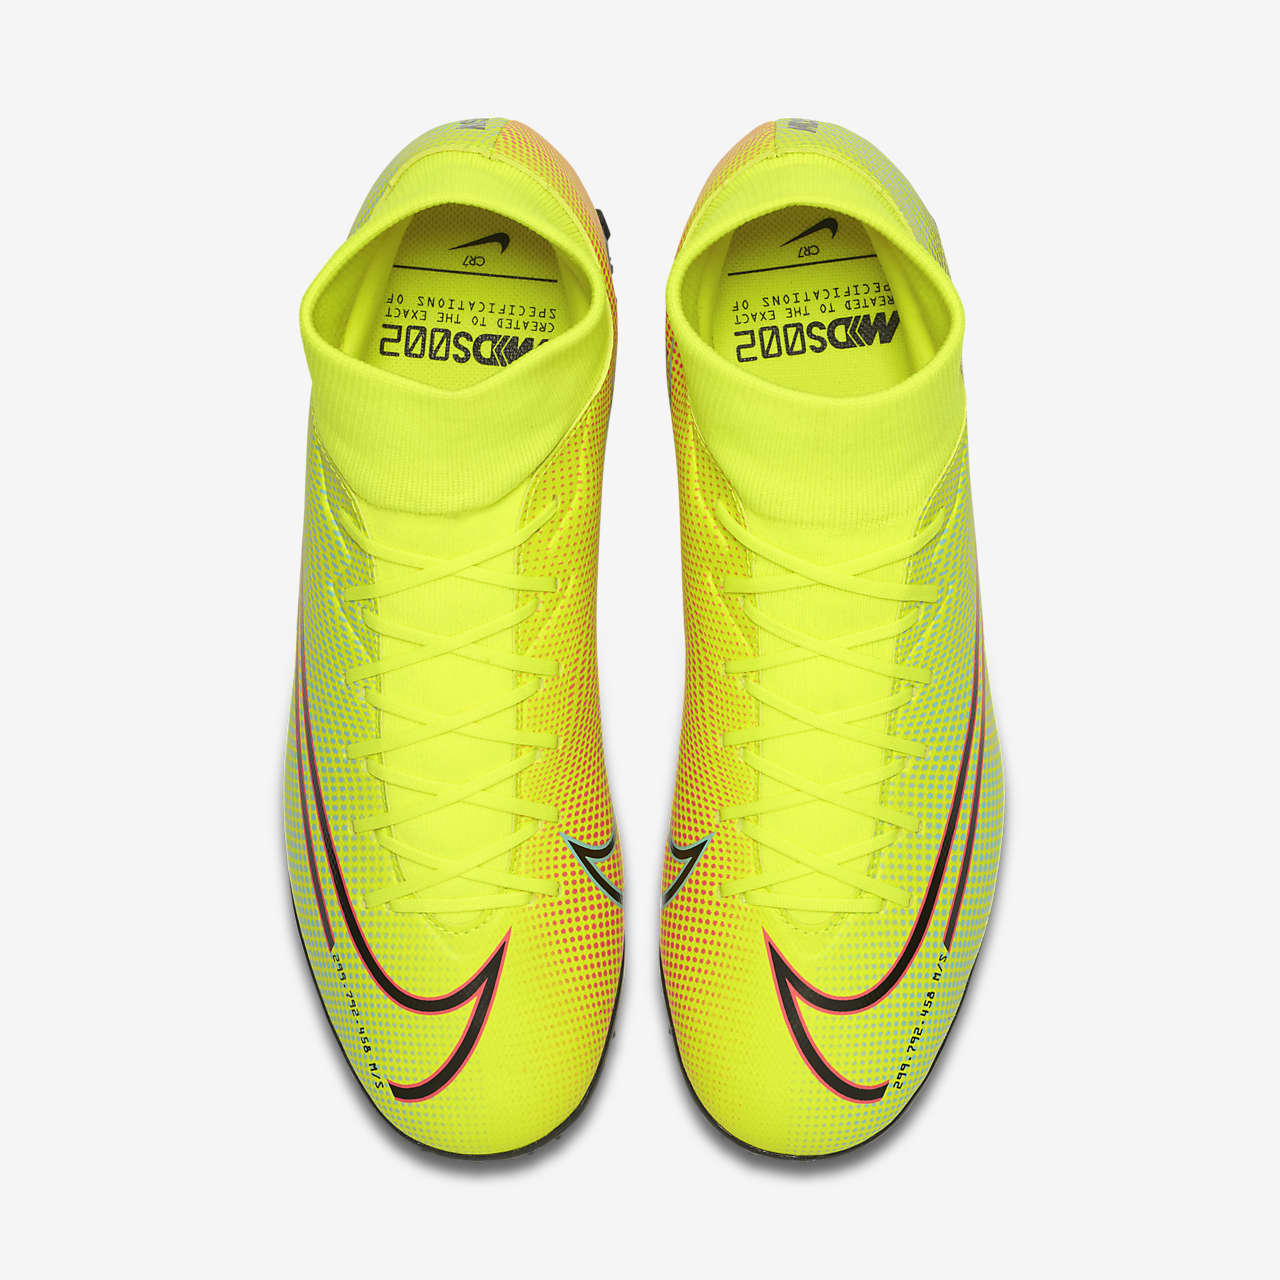 nike superfly sp